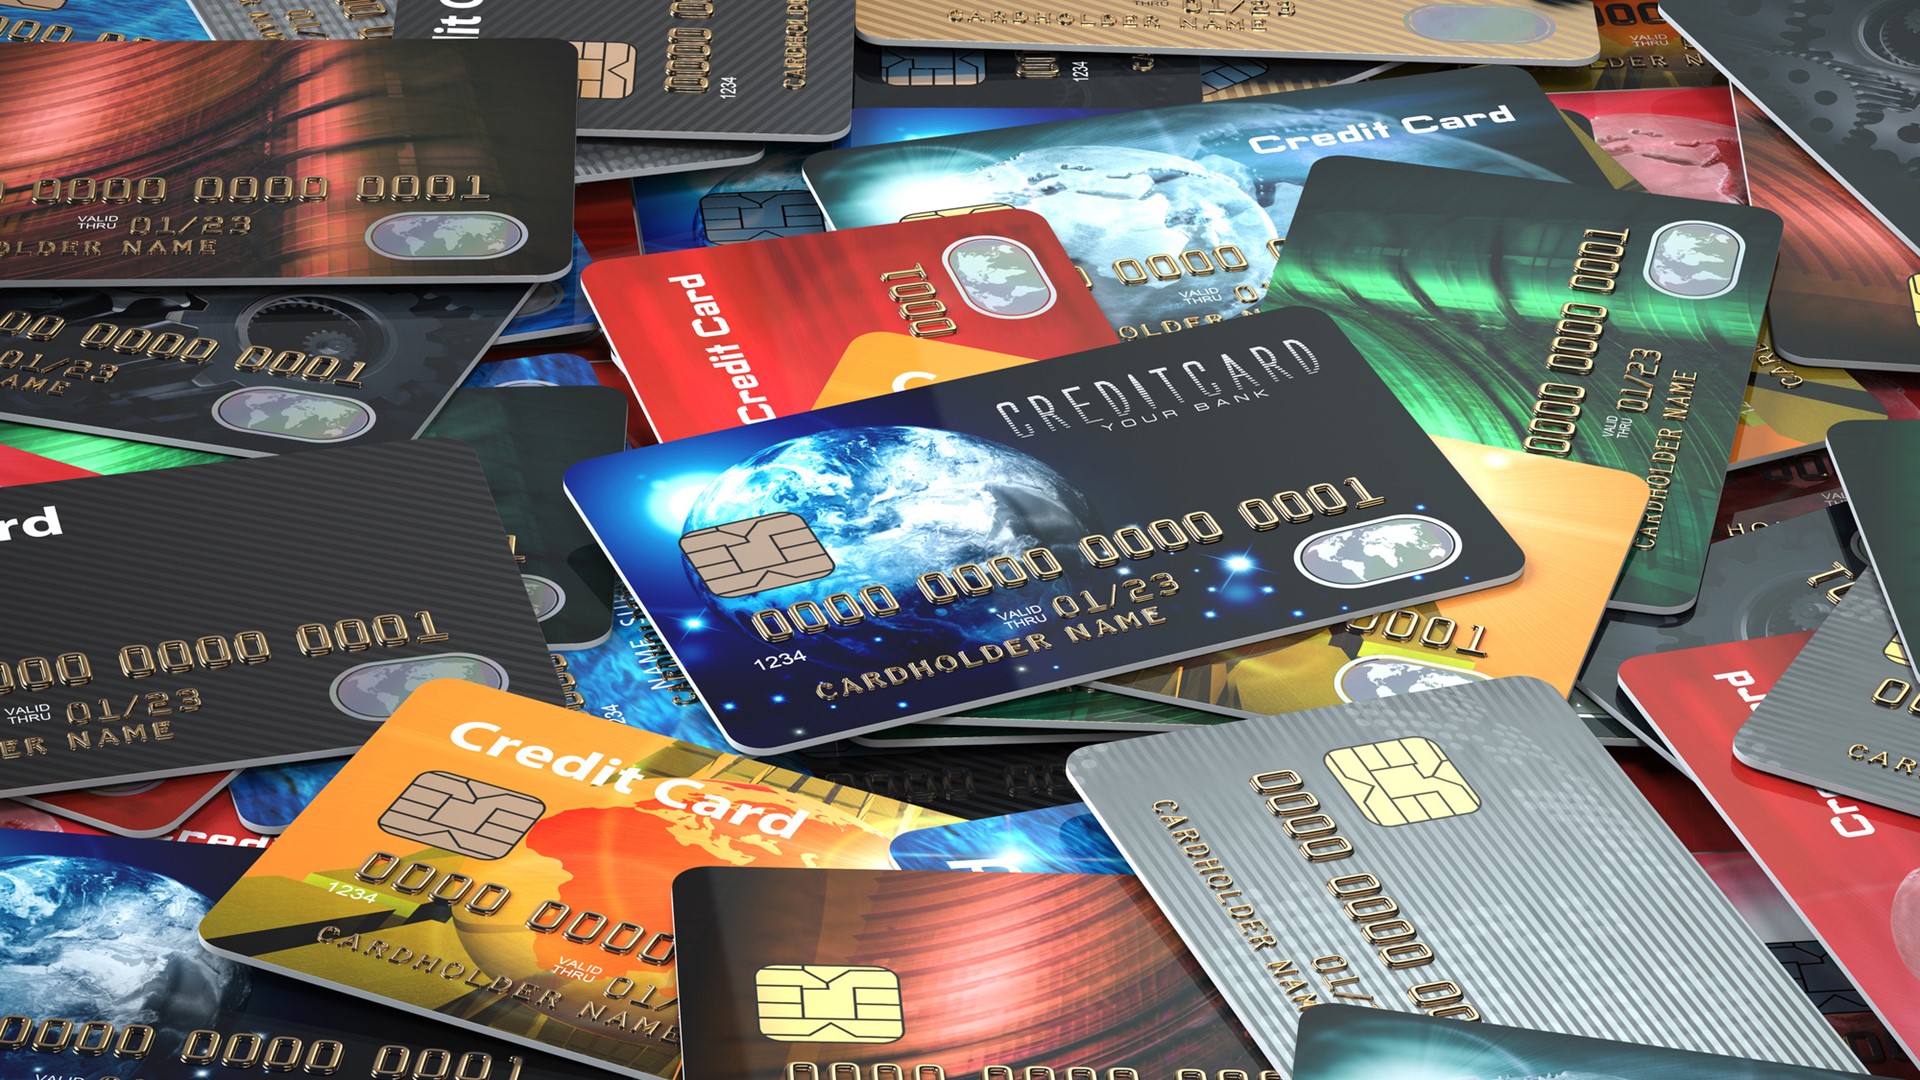 The study, commissioned by WalletHub, revealed that Texas has the sixth-highest rate of credit card debt in the U.S.